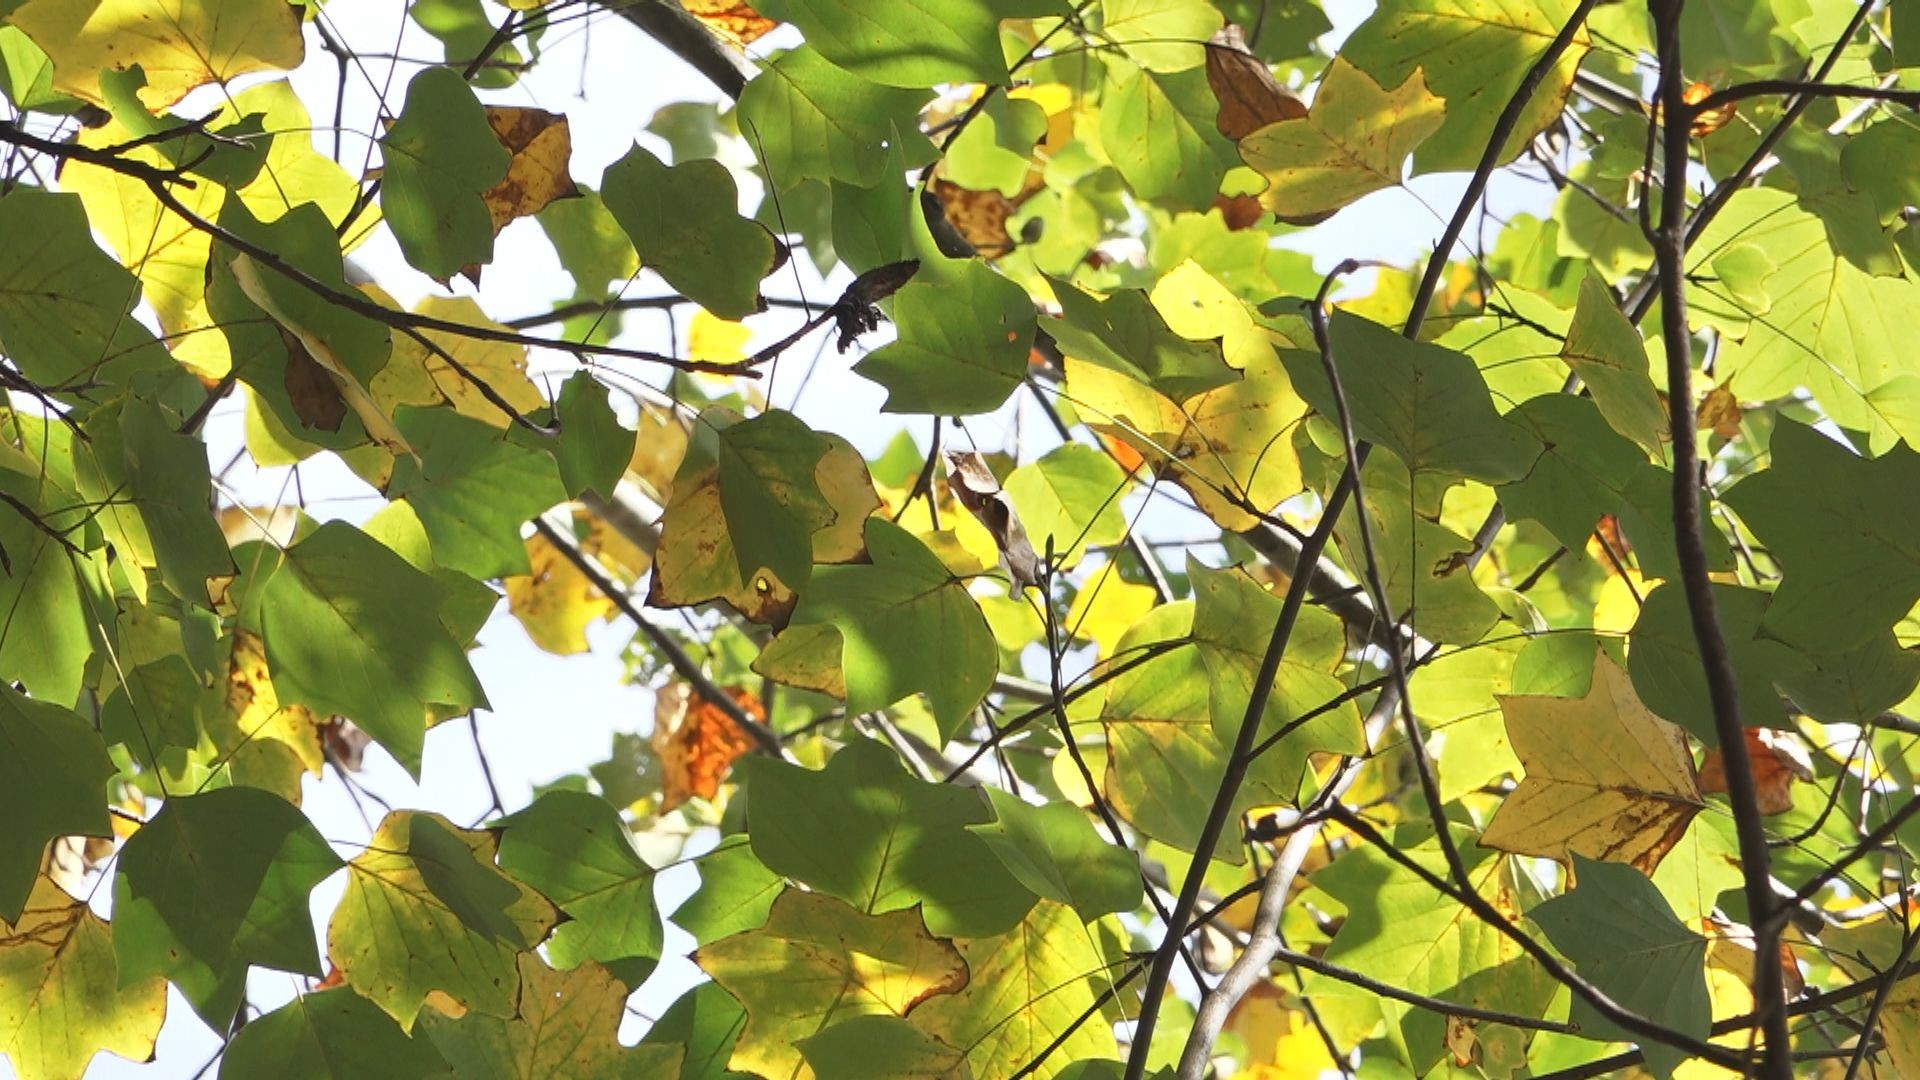 Abnormally hot weather and no rain heading into the fall of 2019 could impact the fall foliage. But we could still get some good color, just a little late.